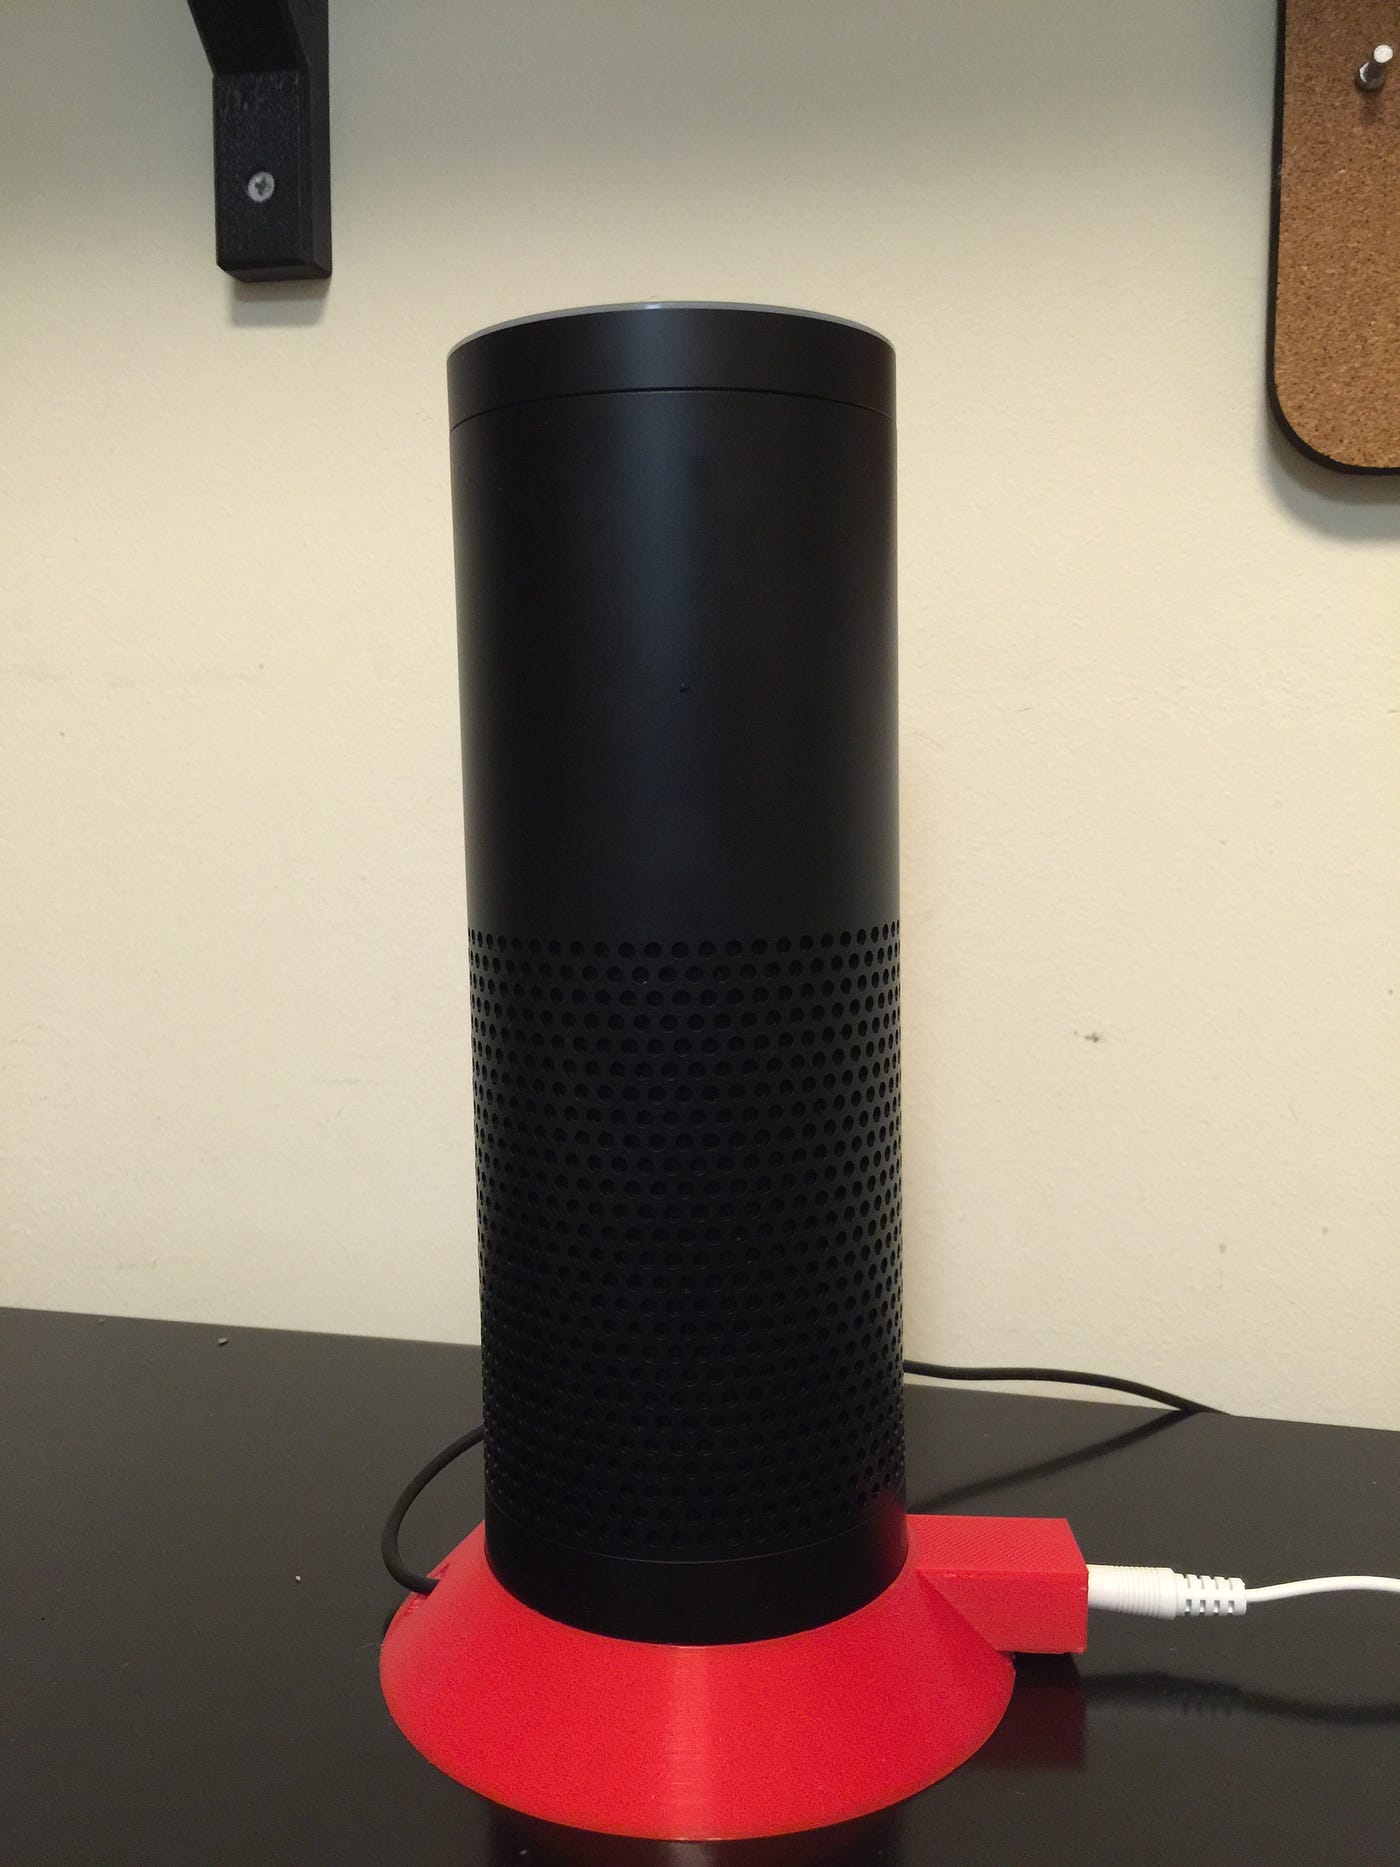 Hacking an Amazon Echo and integrating it with Sonos | by Mathias Hansen |  Medium